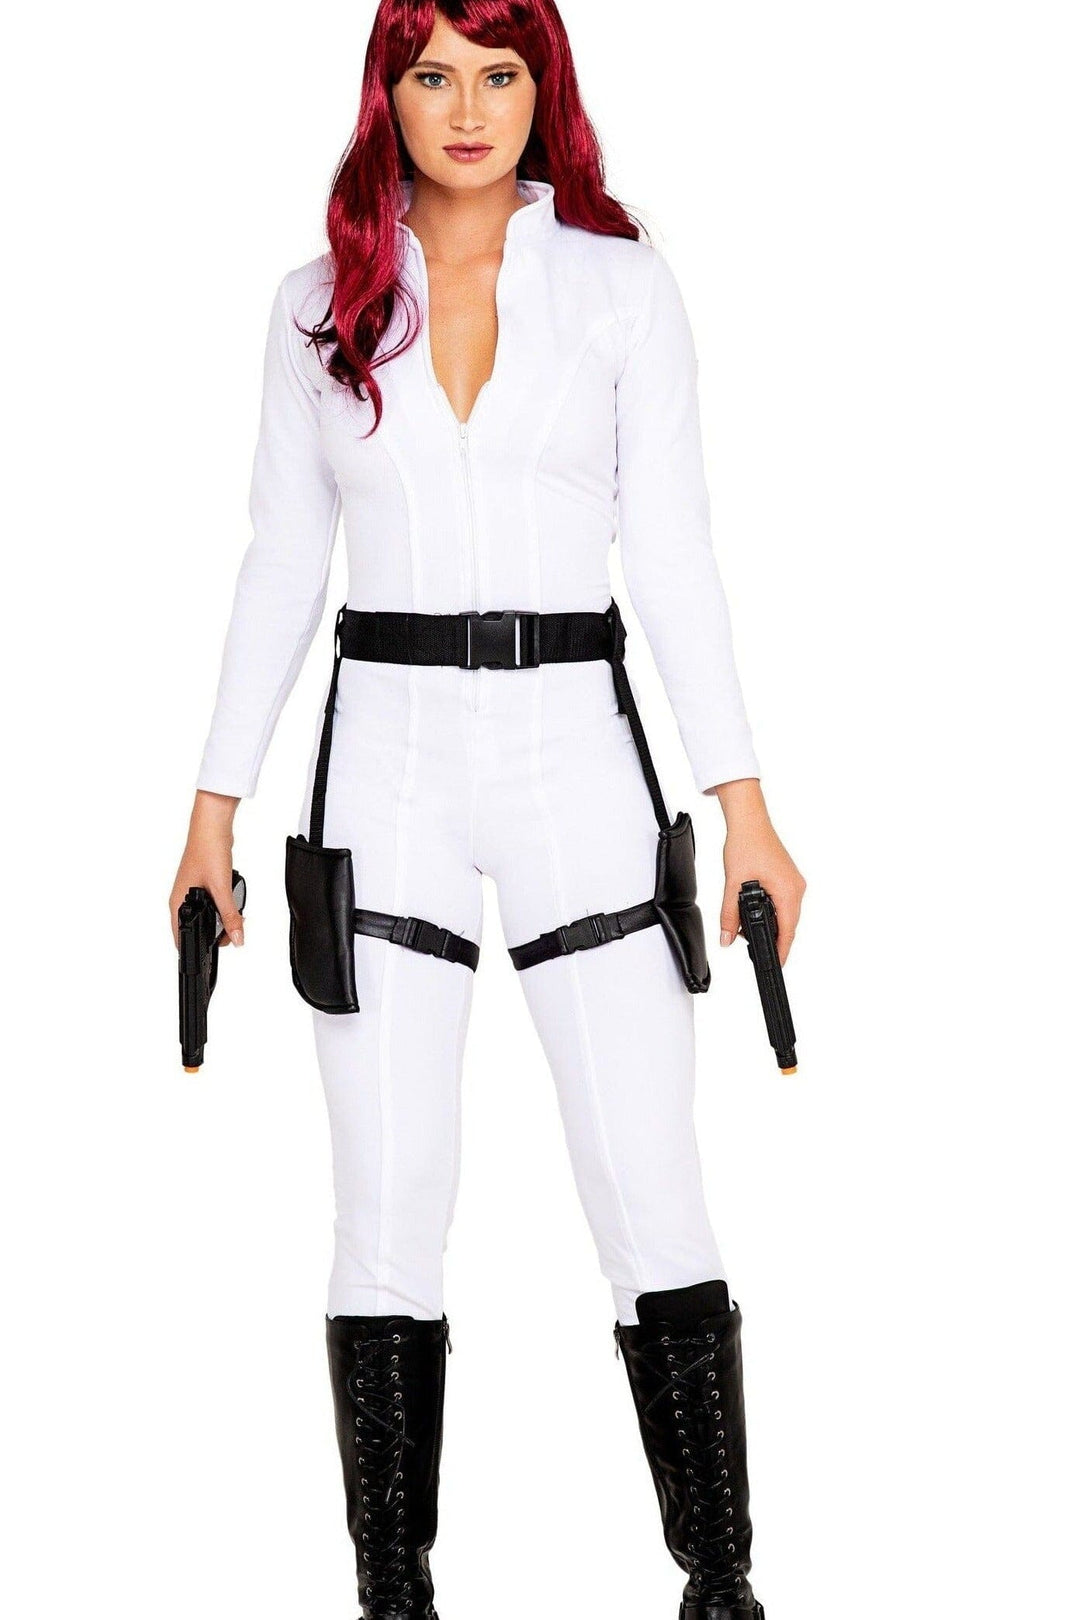 Black Ops Spy Costume-Hero Costumes-Roma Costumes-SEXYSHOES.COM